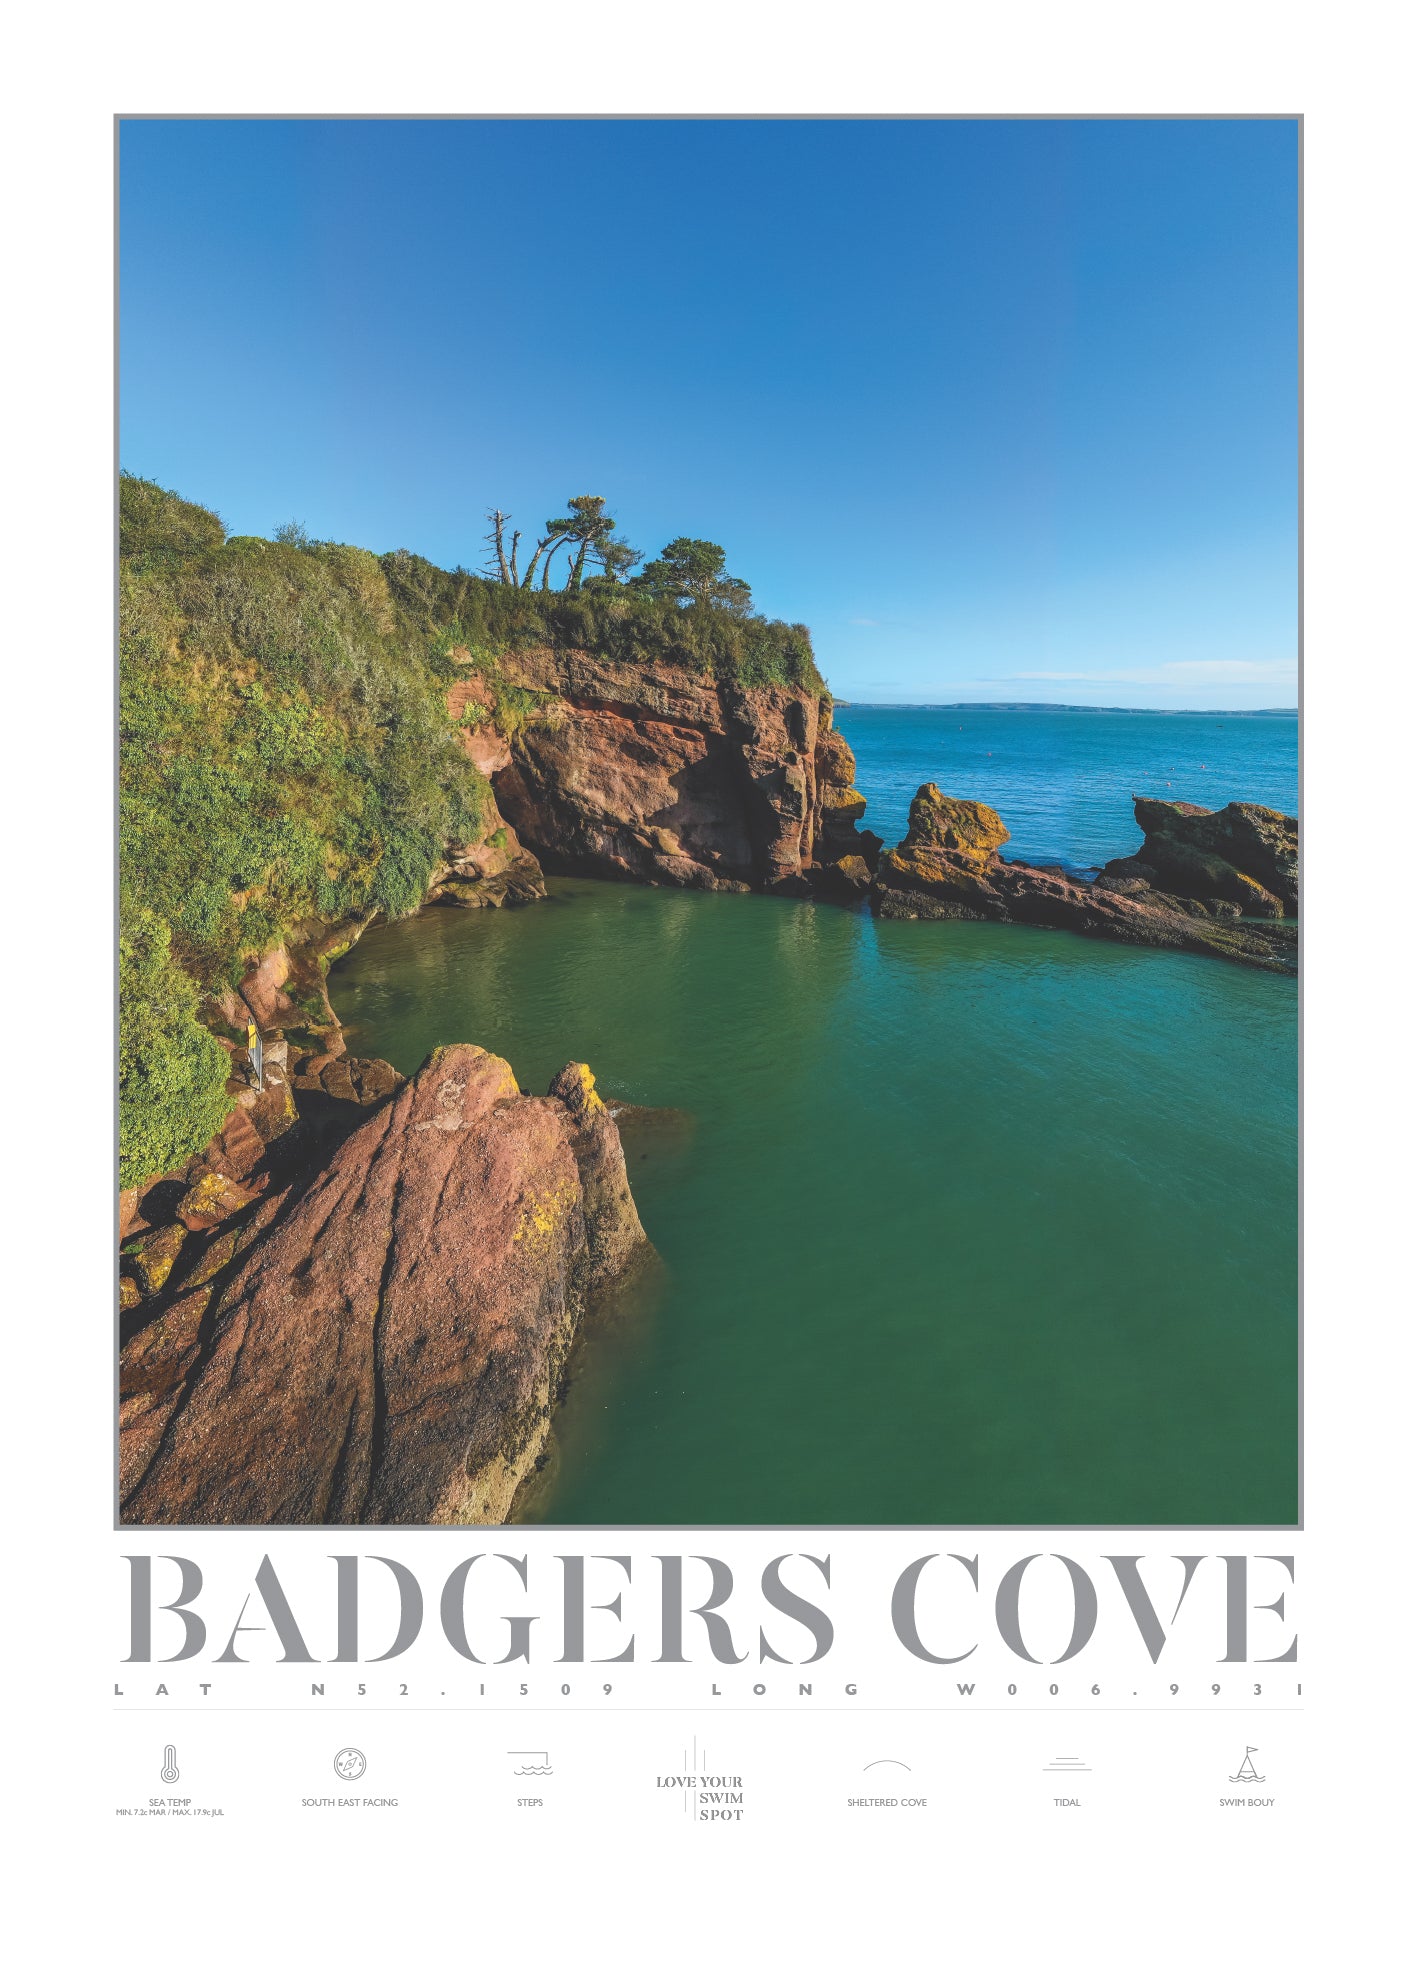 DUNMORE EAST BADGERS COVE CO WATERFORD